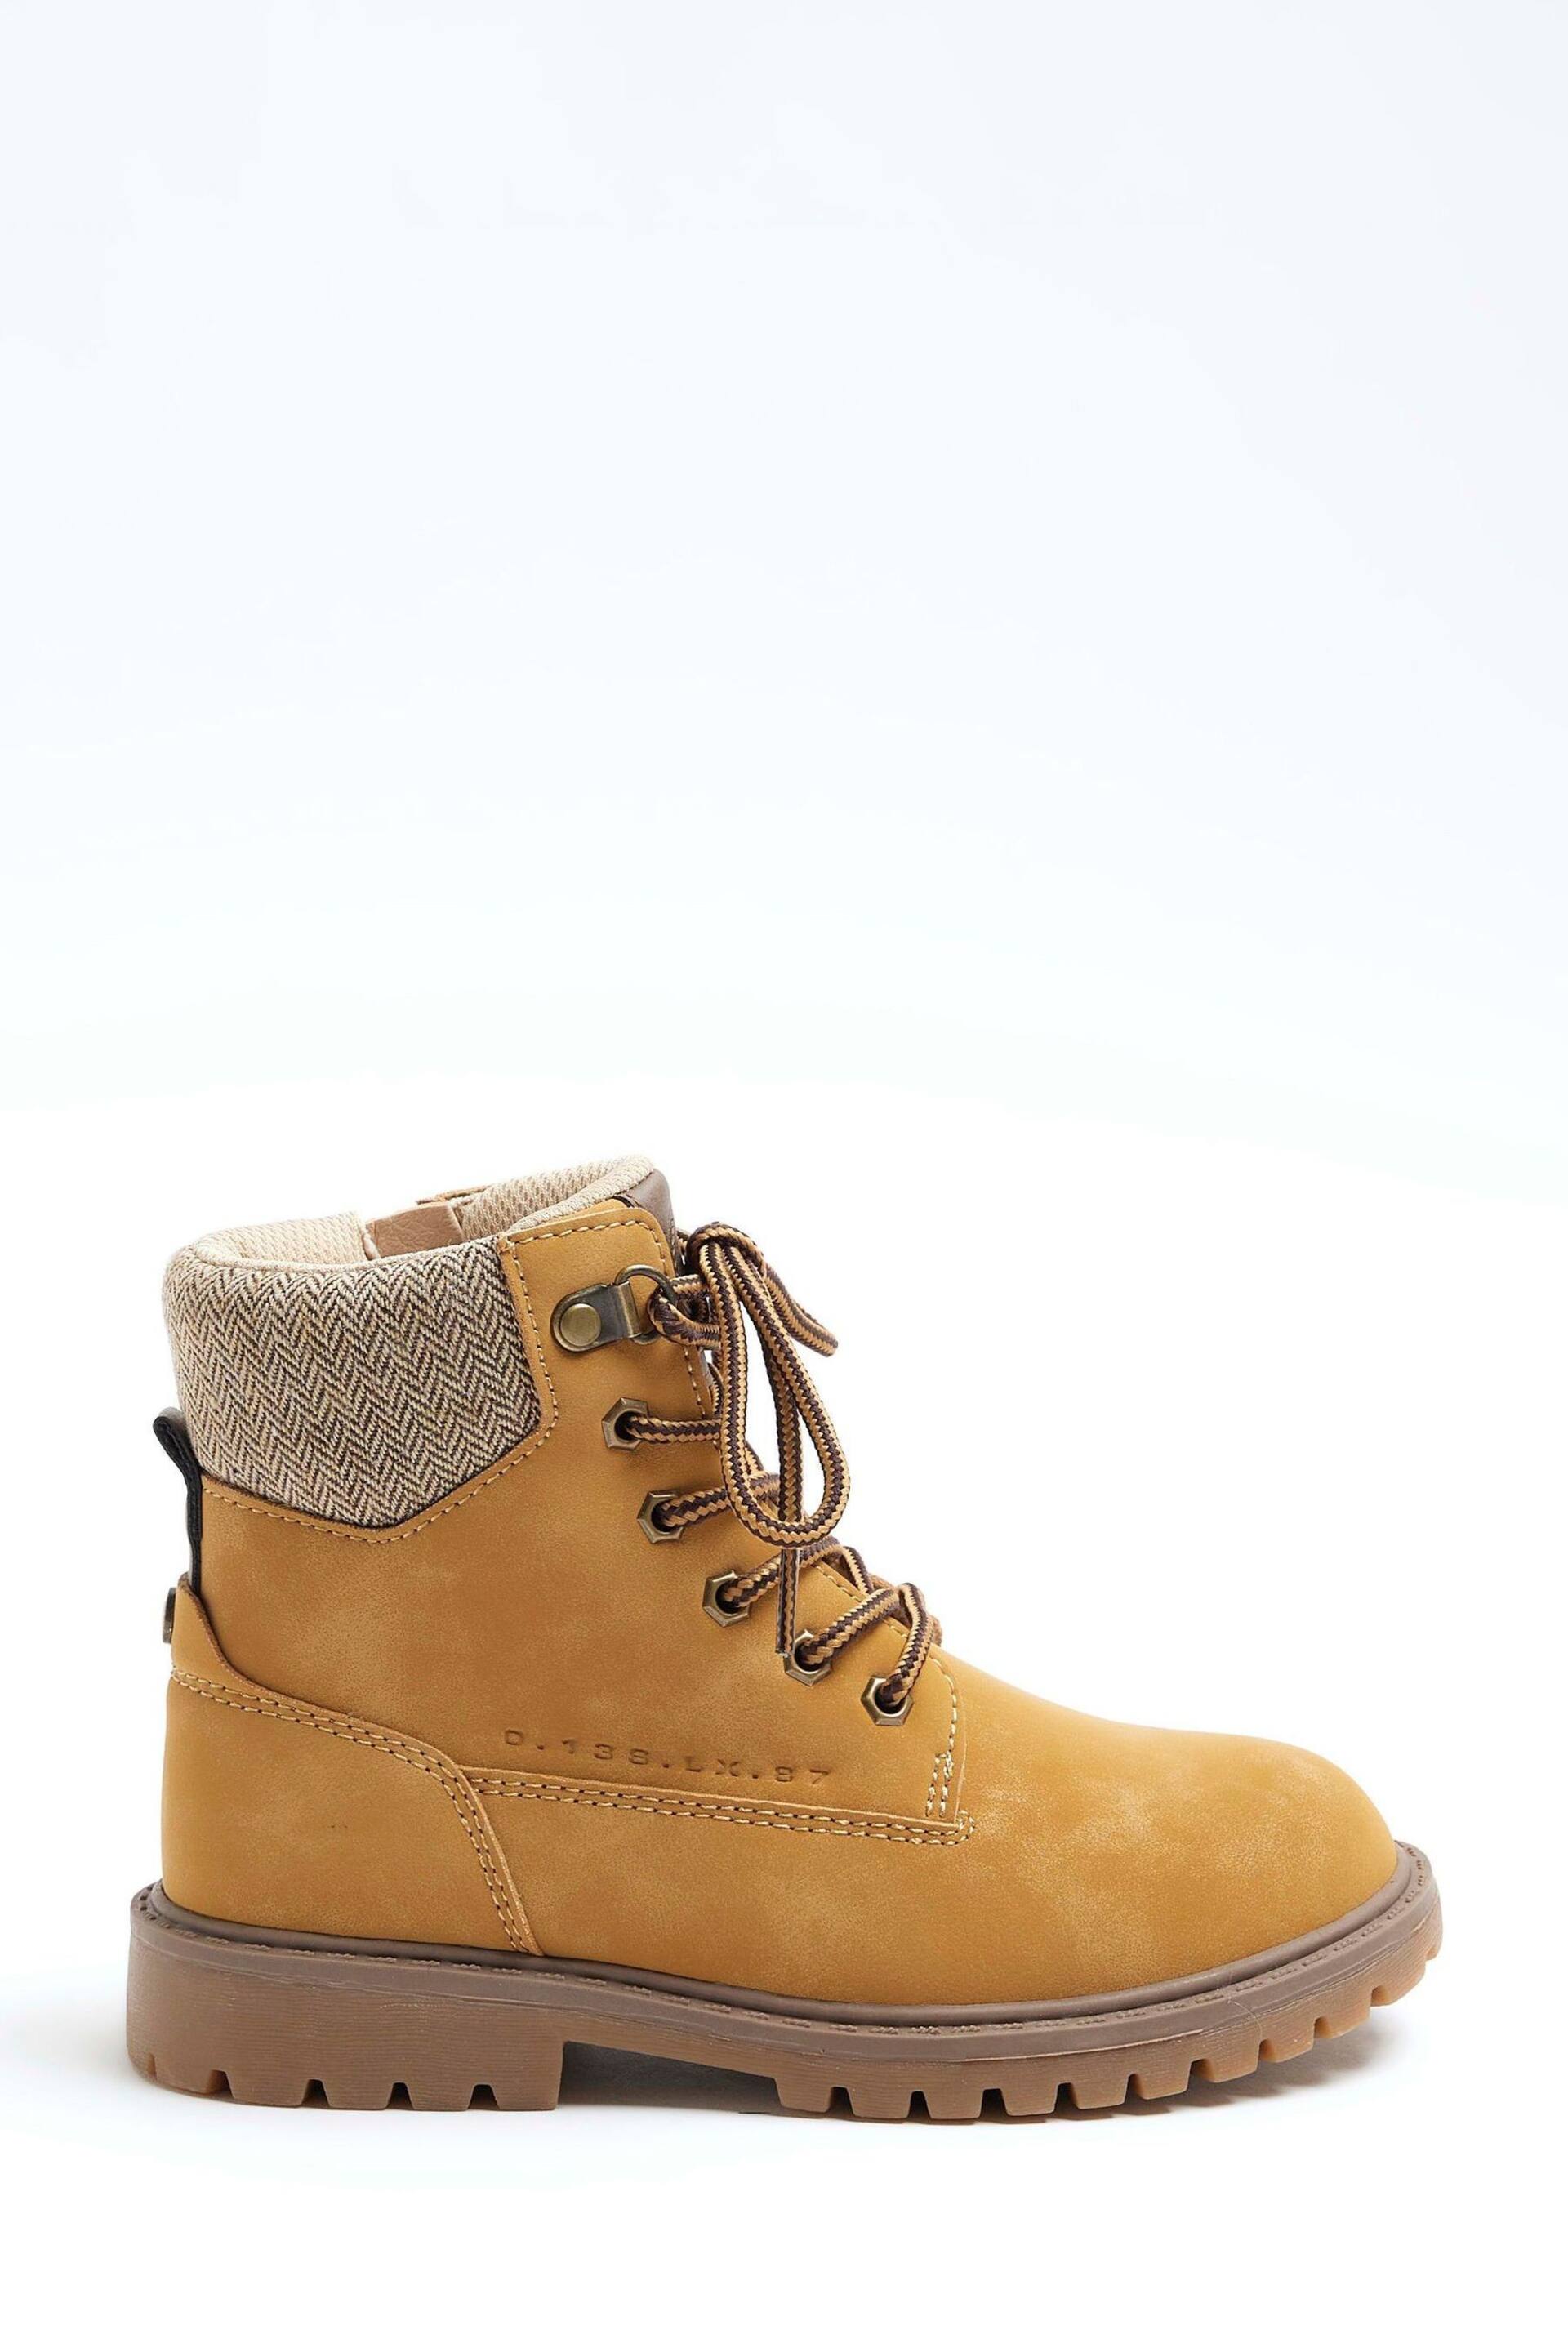 River Island Brown Boys Worker Boots - Image 1 of 4